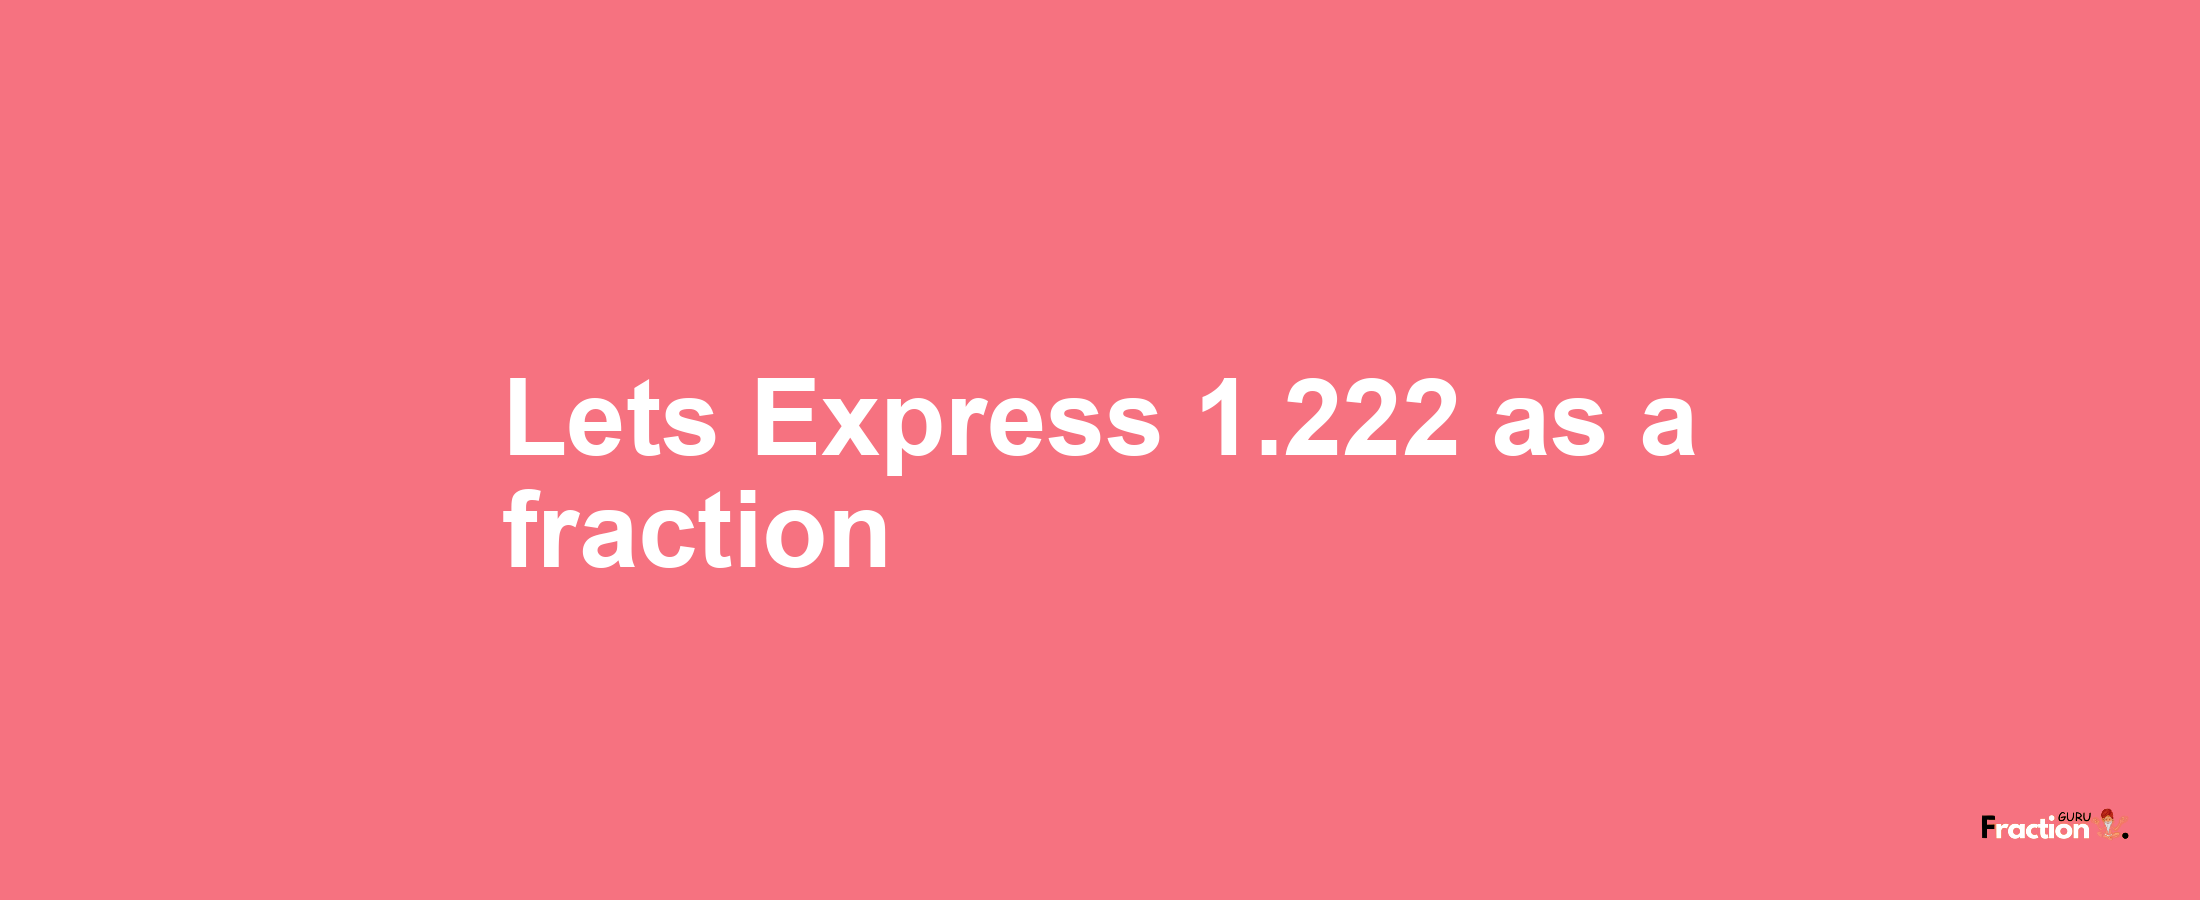 Lets Express 1.222 as afraction